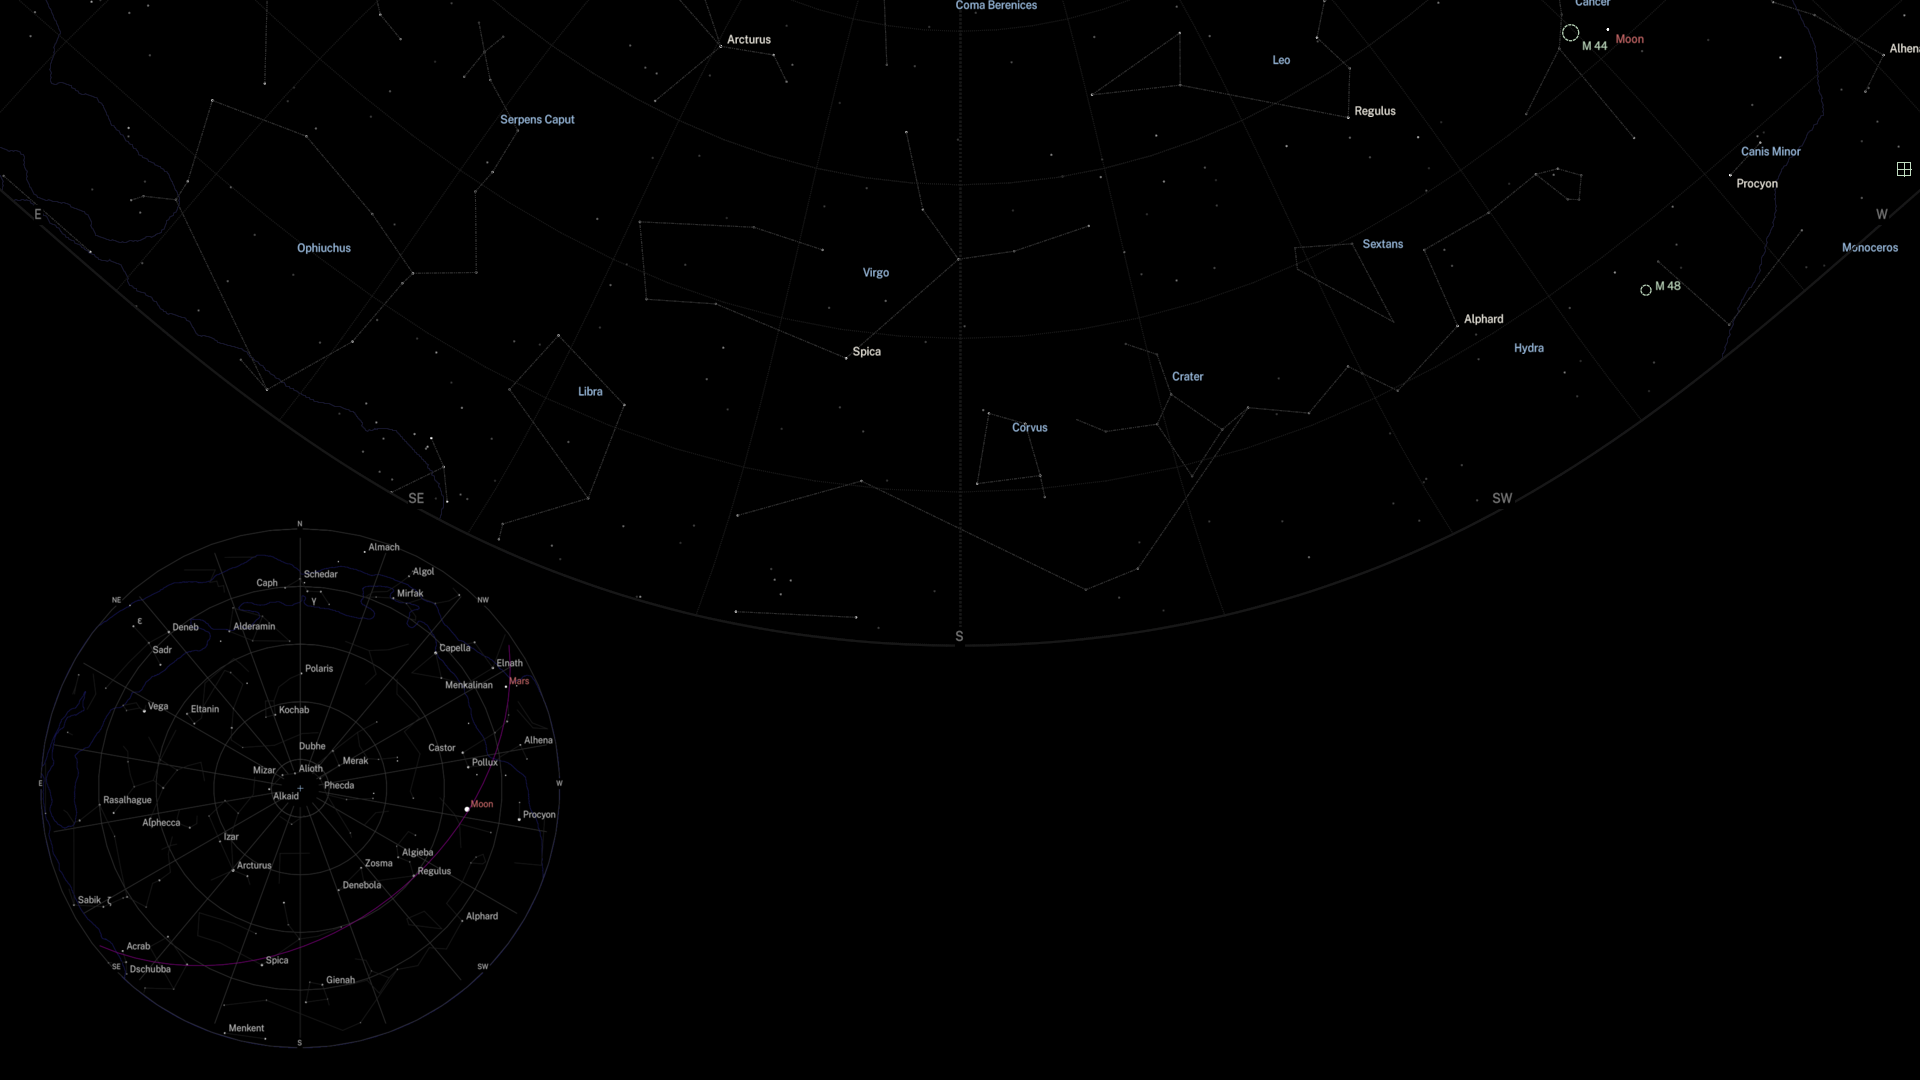 A star chart designed to be used as a desktop background.